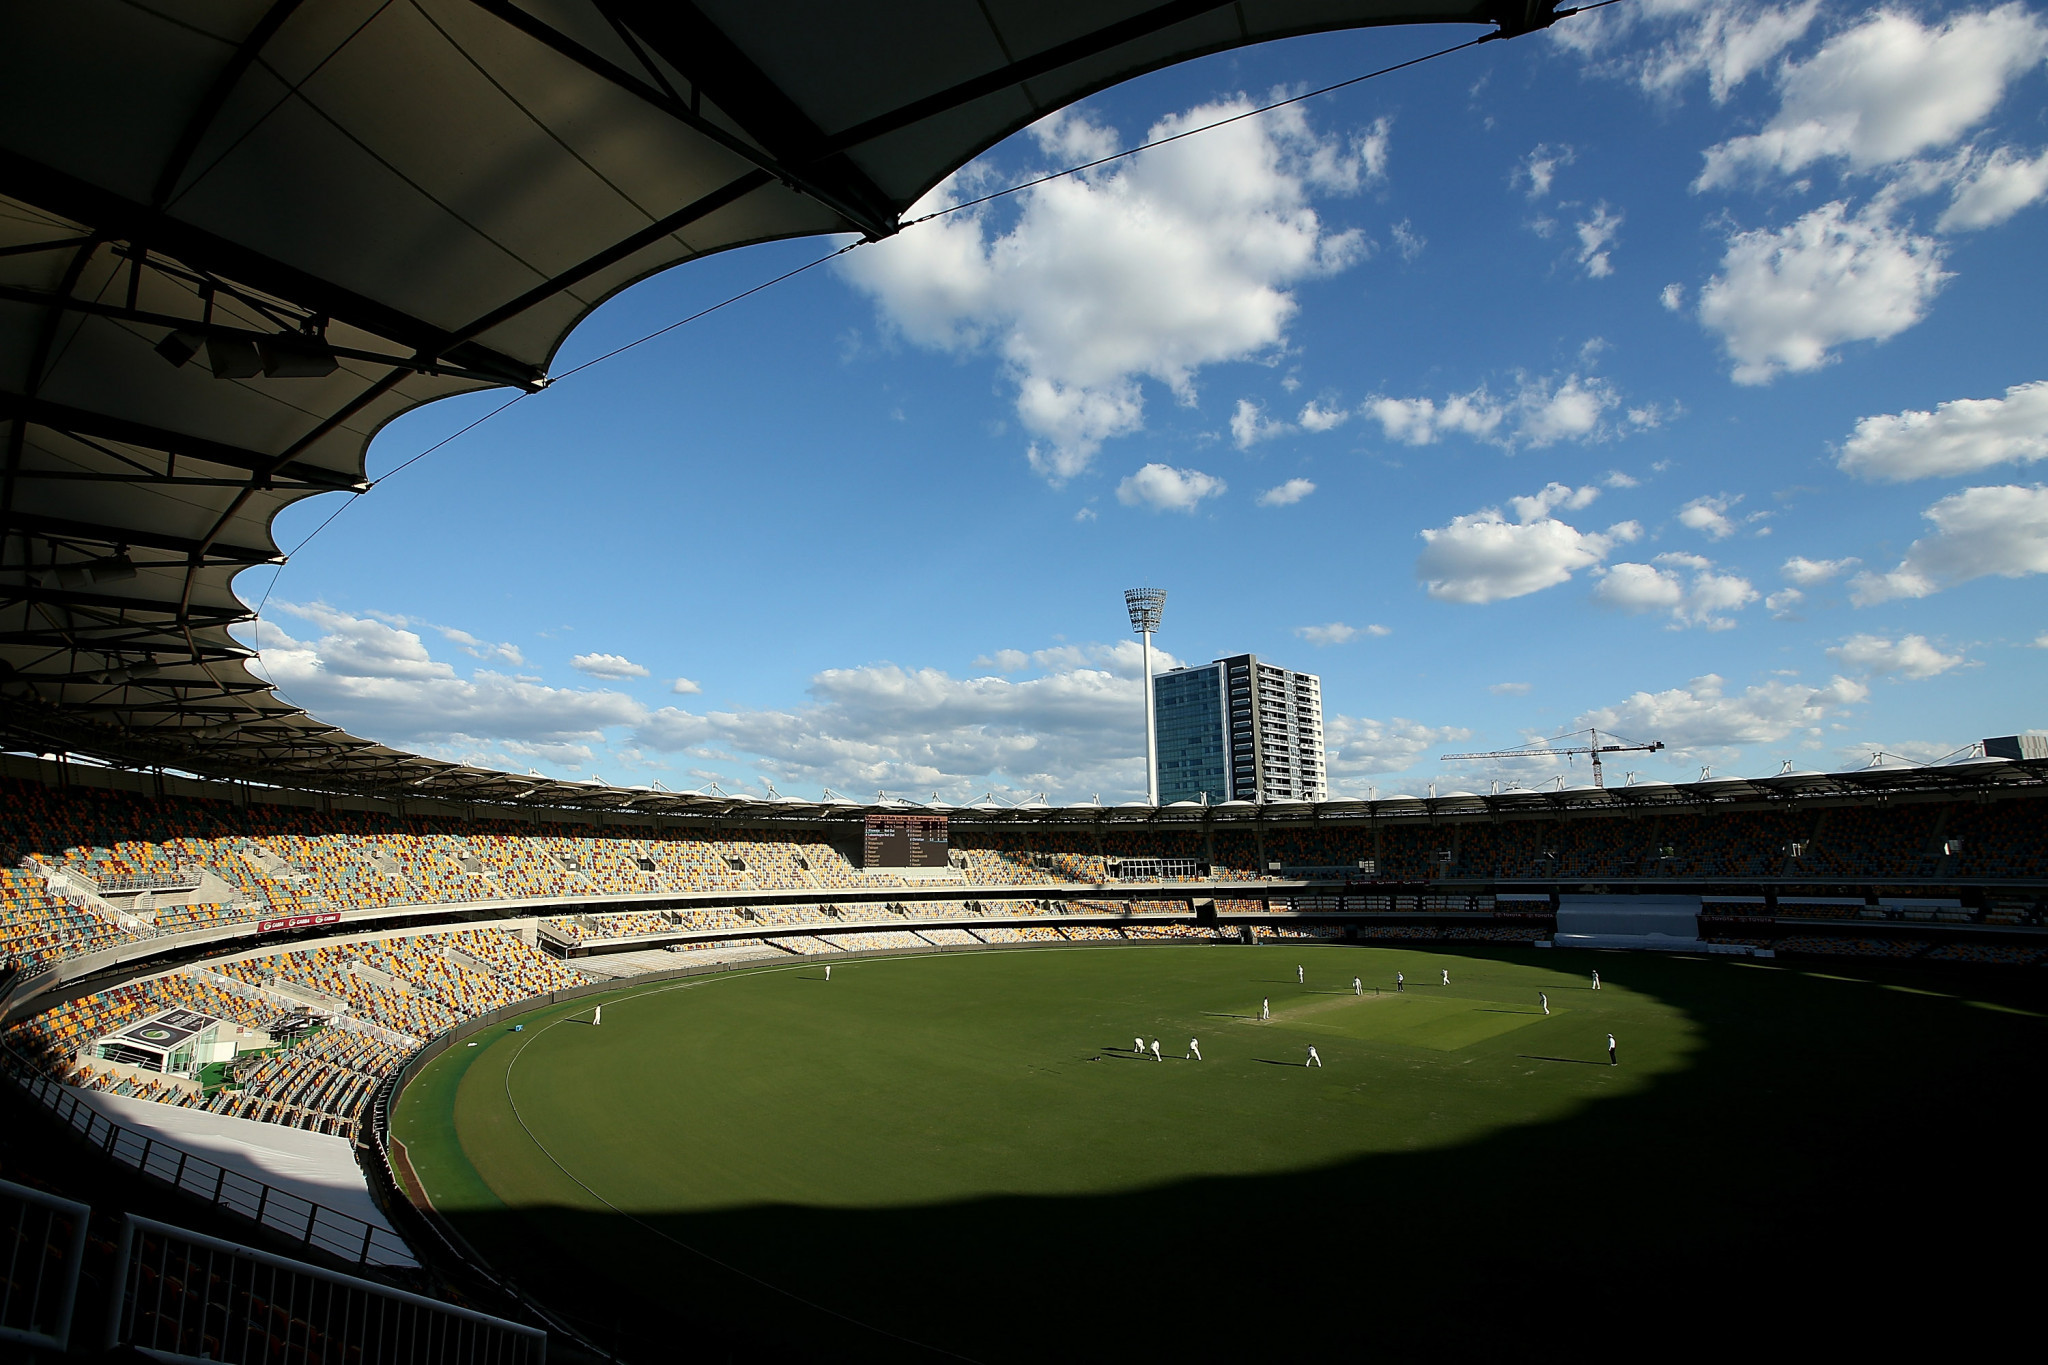 The Brisbane Cricket Ground is set to act as the main venue for the 2032 Olympics ©Getty Images